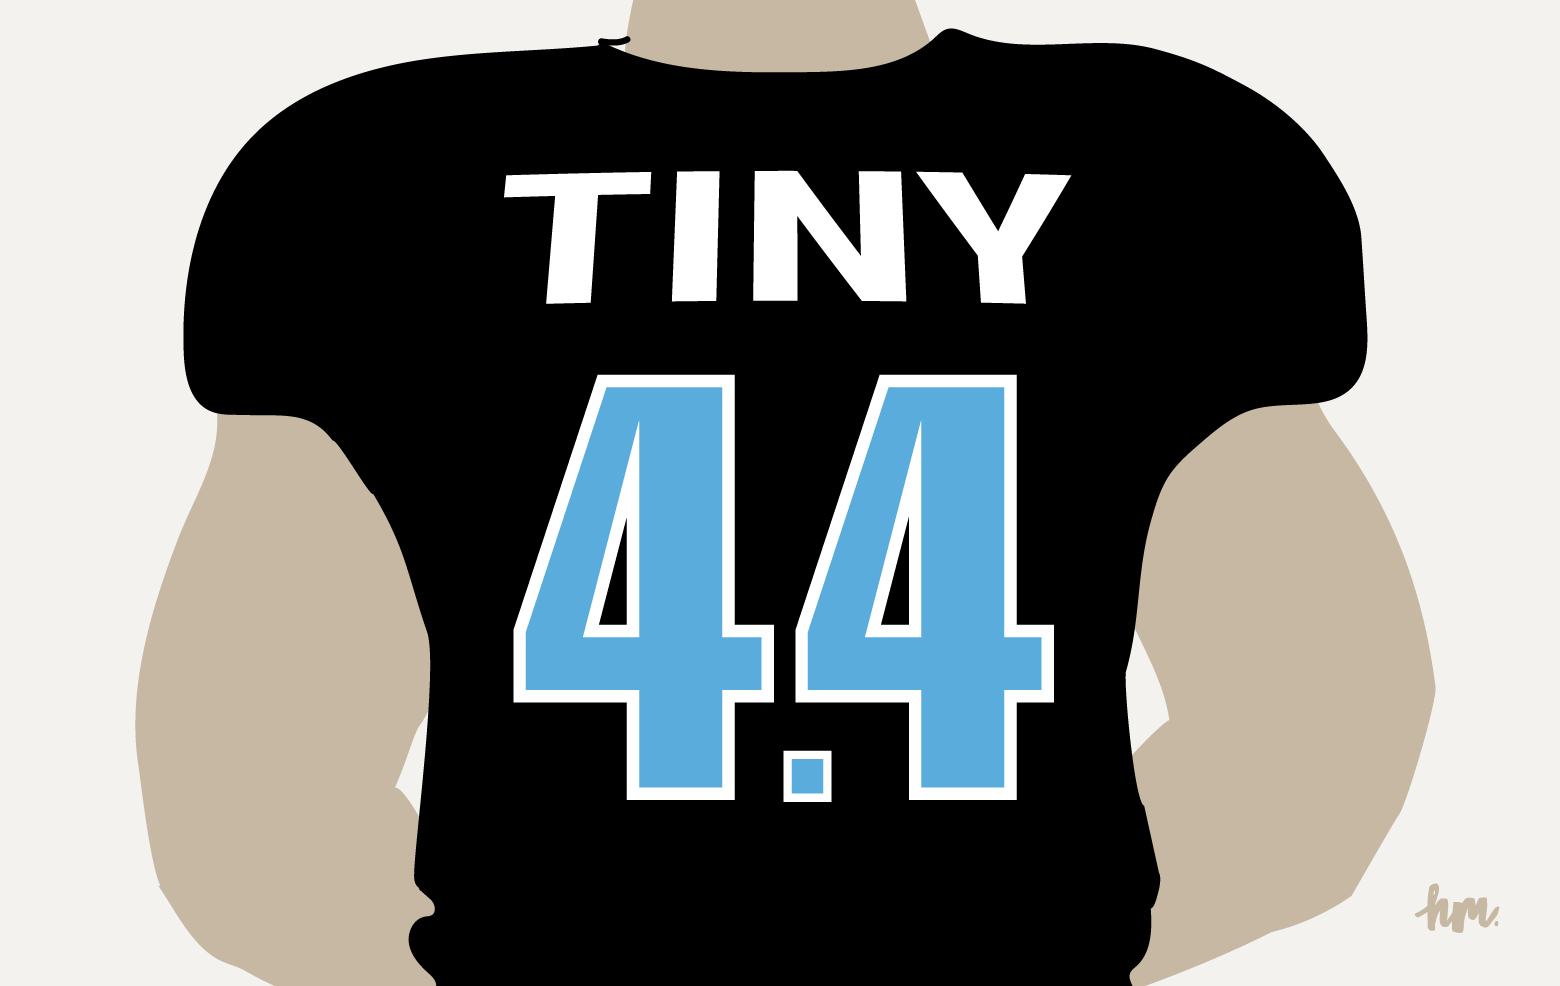 Illustration of a linebacker with the name Tiny and the number 4.4 on his jersey.